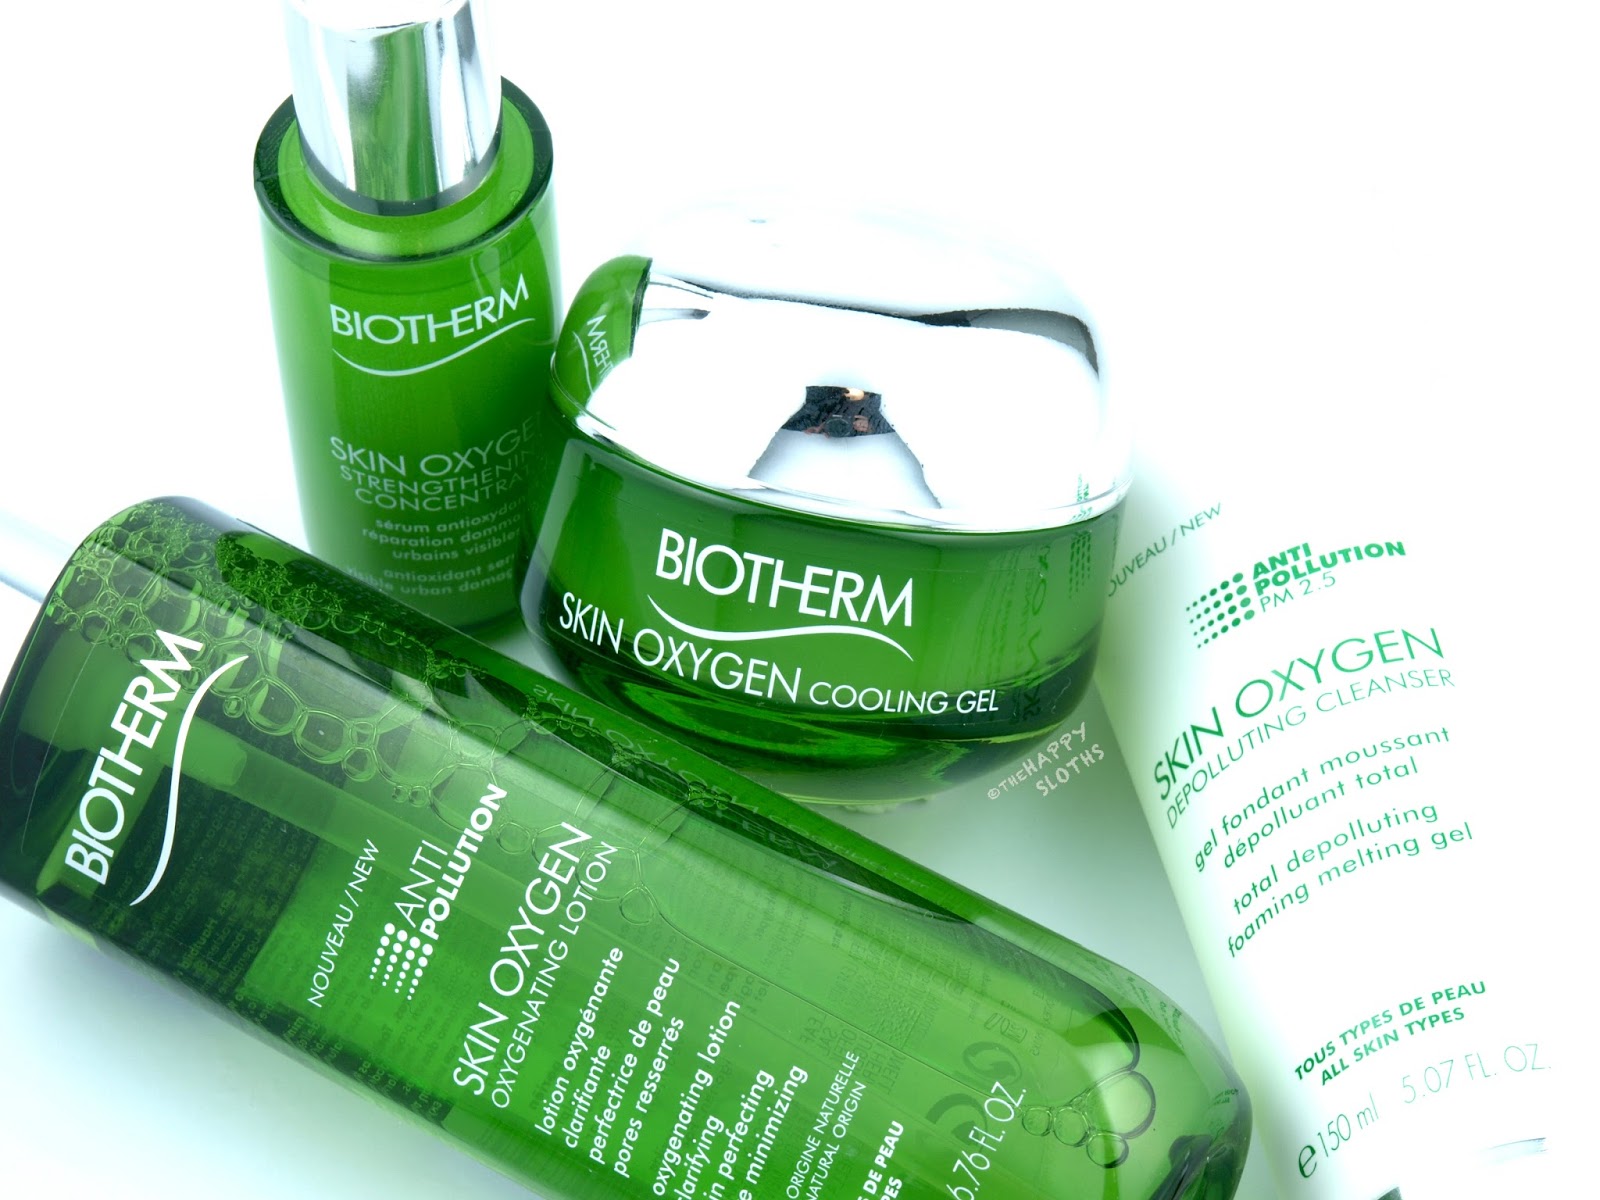 Biotherm Skin Oxygen Collection: Review